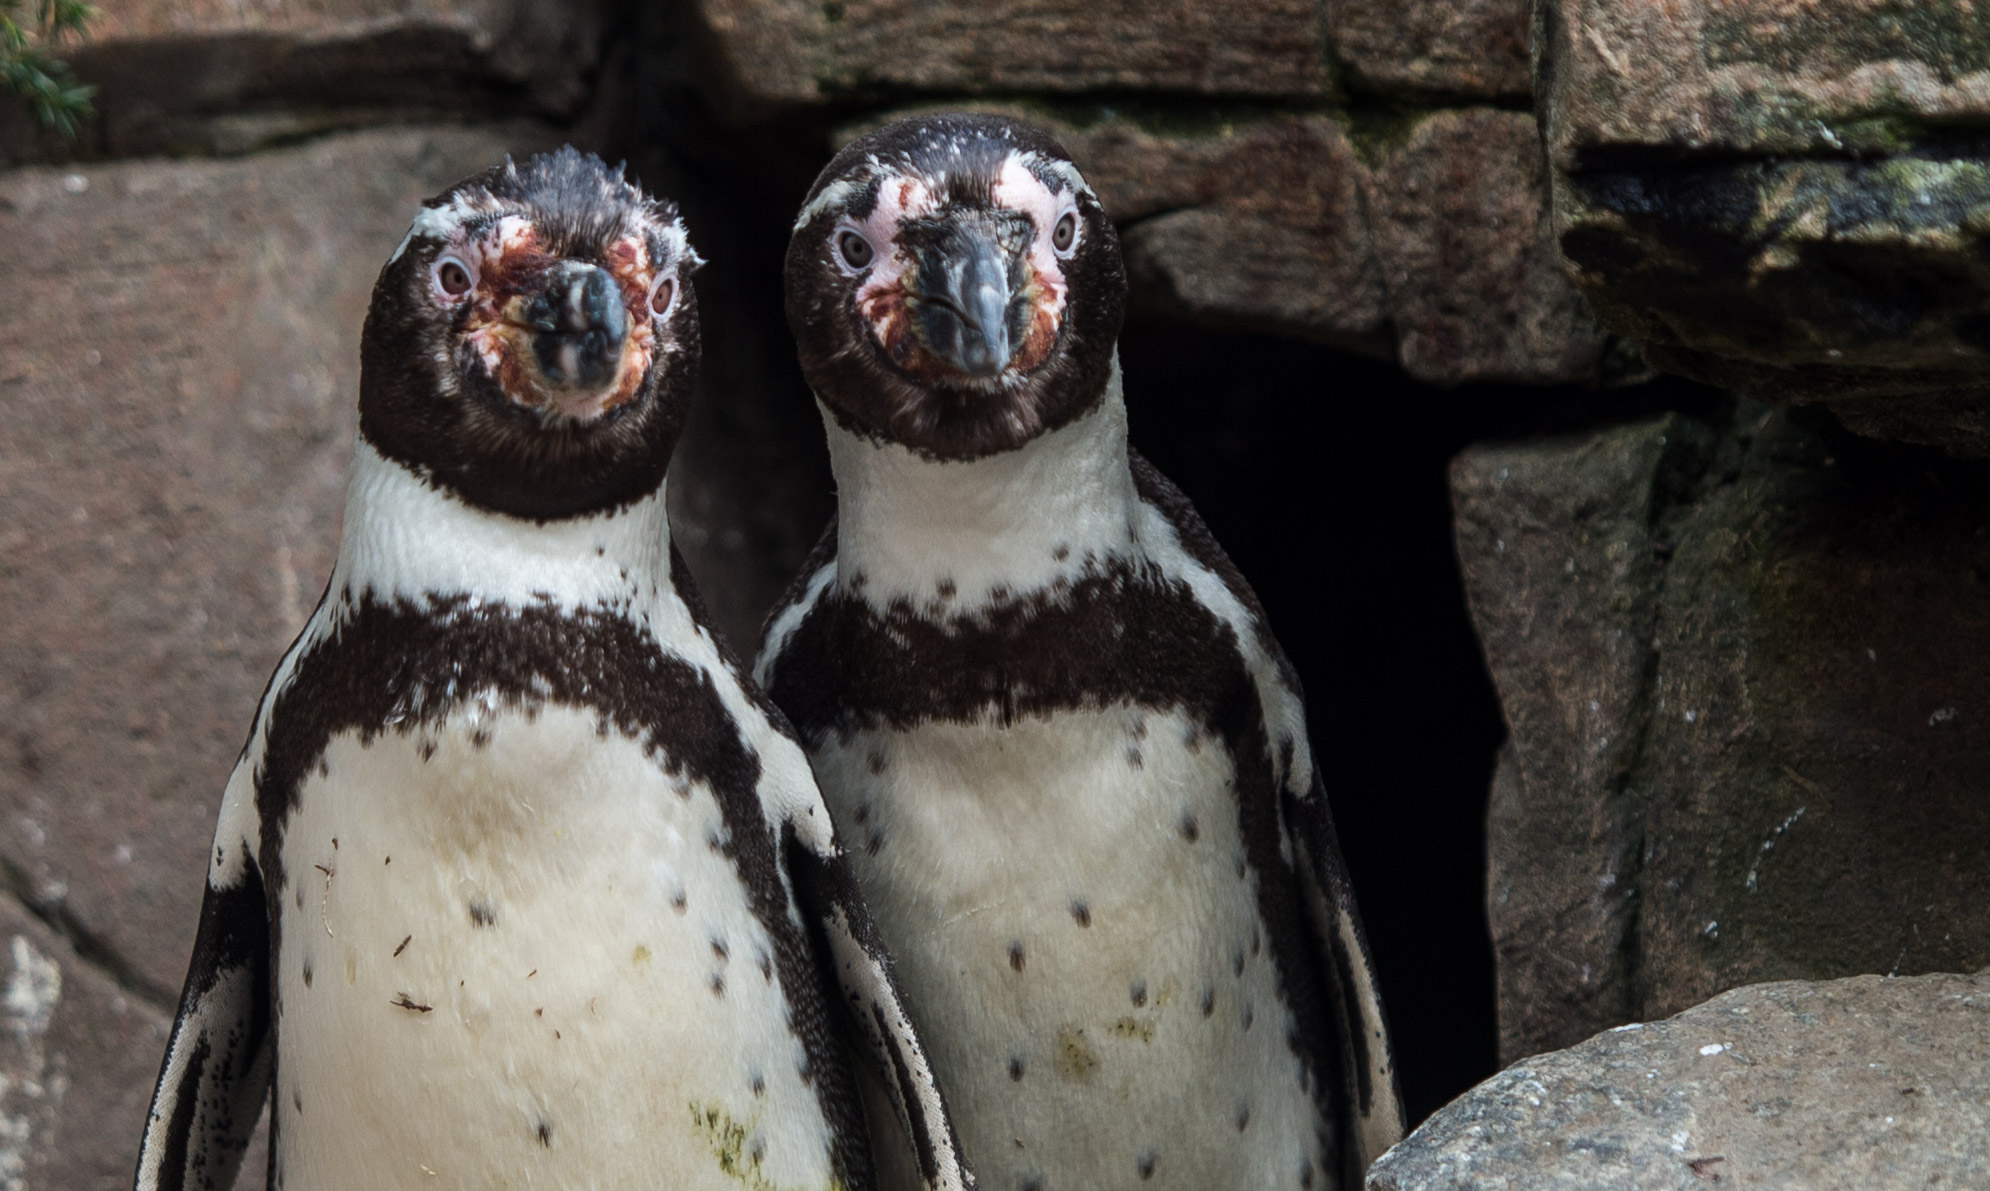 PHOTO: The homosexual Humboldt penguins Juan, left, and Carlos, right, stand in their enclosure in the Tierpark Hagenbeck zoo in Hamburg, Germany, April 12, 2016. 